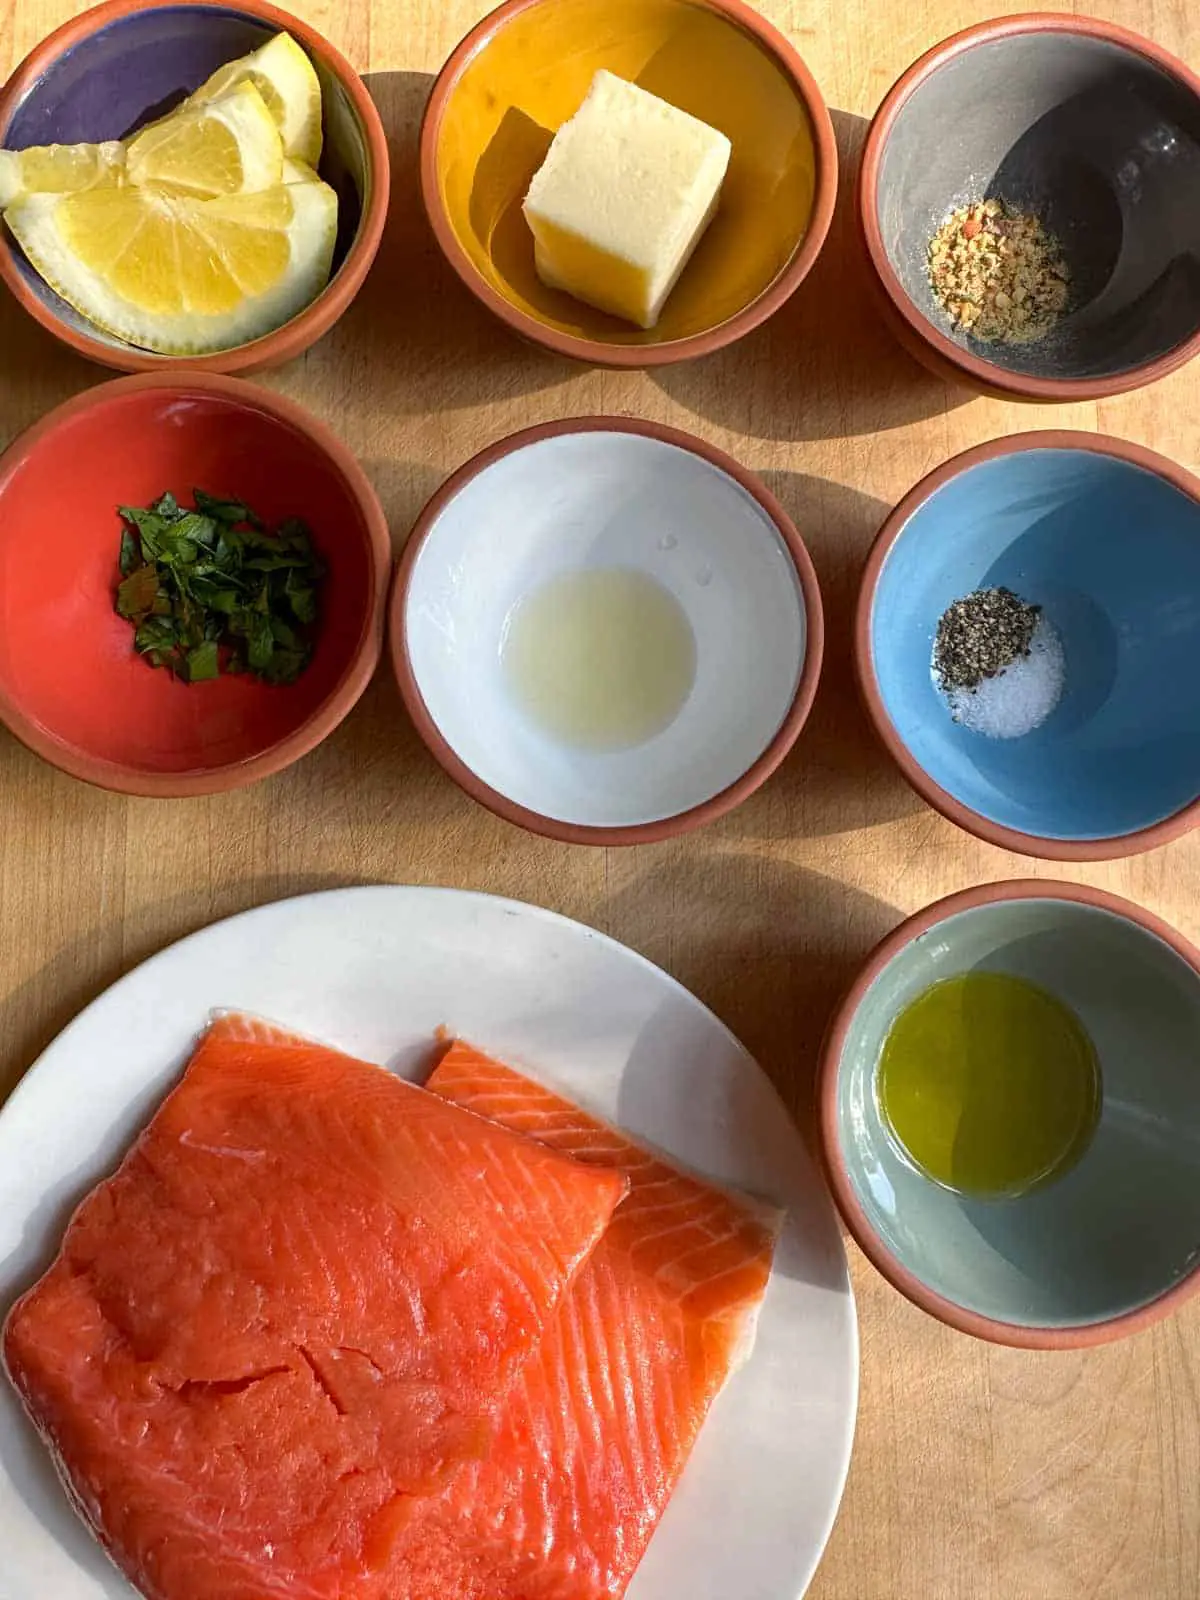 A white plate with raw salmon fillets and small bowls containing slices of lemon, butter, garlic blend seasoning, minced parsley, lemon juice, salt and pepper, and olive oil.